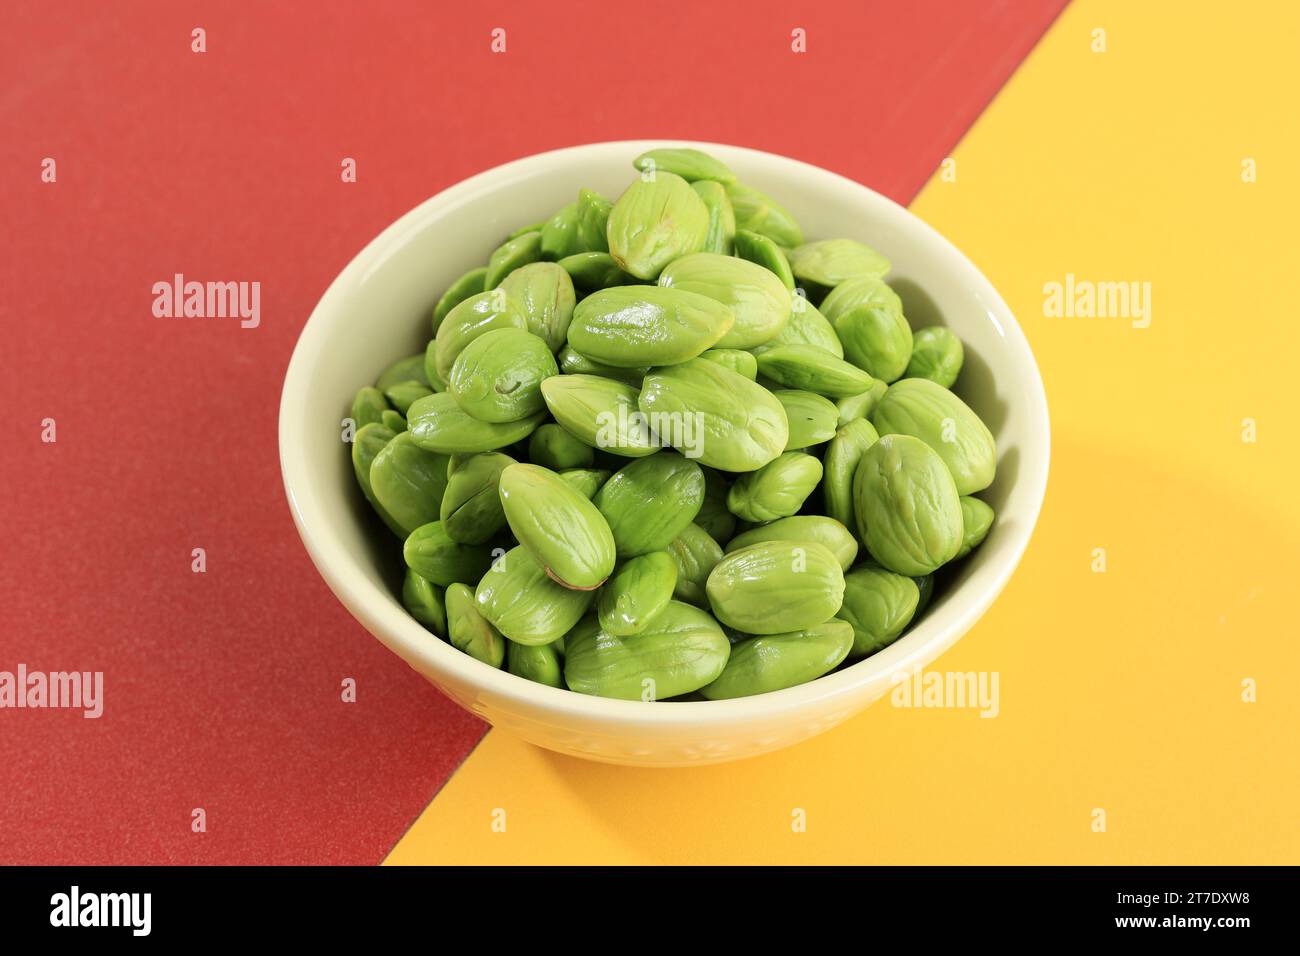 Raw Peeled  Petai or Pete Parkia speciosa. Known as Stinky Bean or Bitter Bean. On Red and Yellow Background Stock Photo